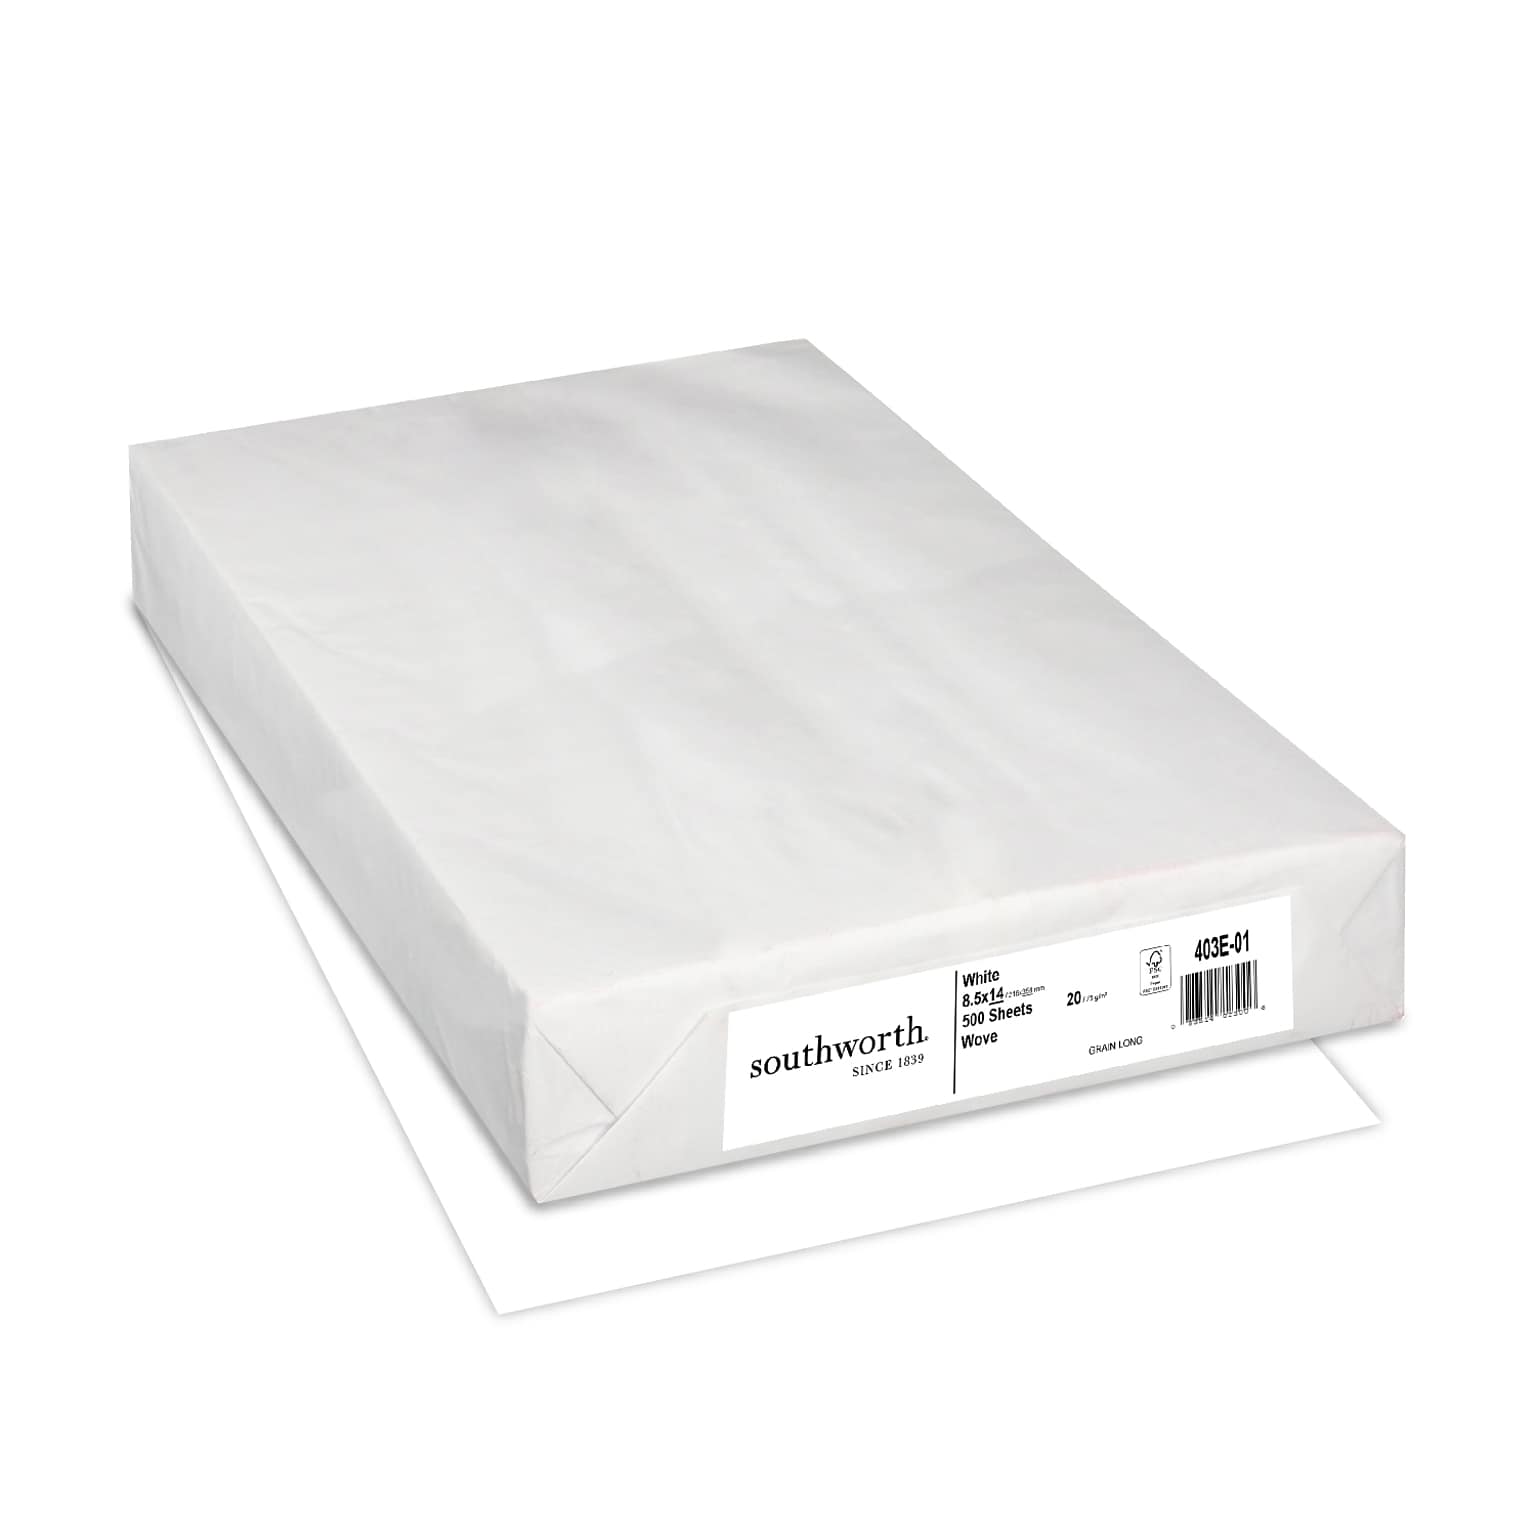 Southworth 8.5 x 14 Business Paper, 20 lbs., White with Wove Finish, 500 Sheets/Ream (403E)